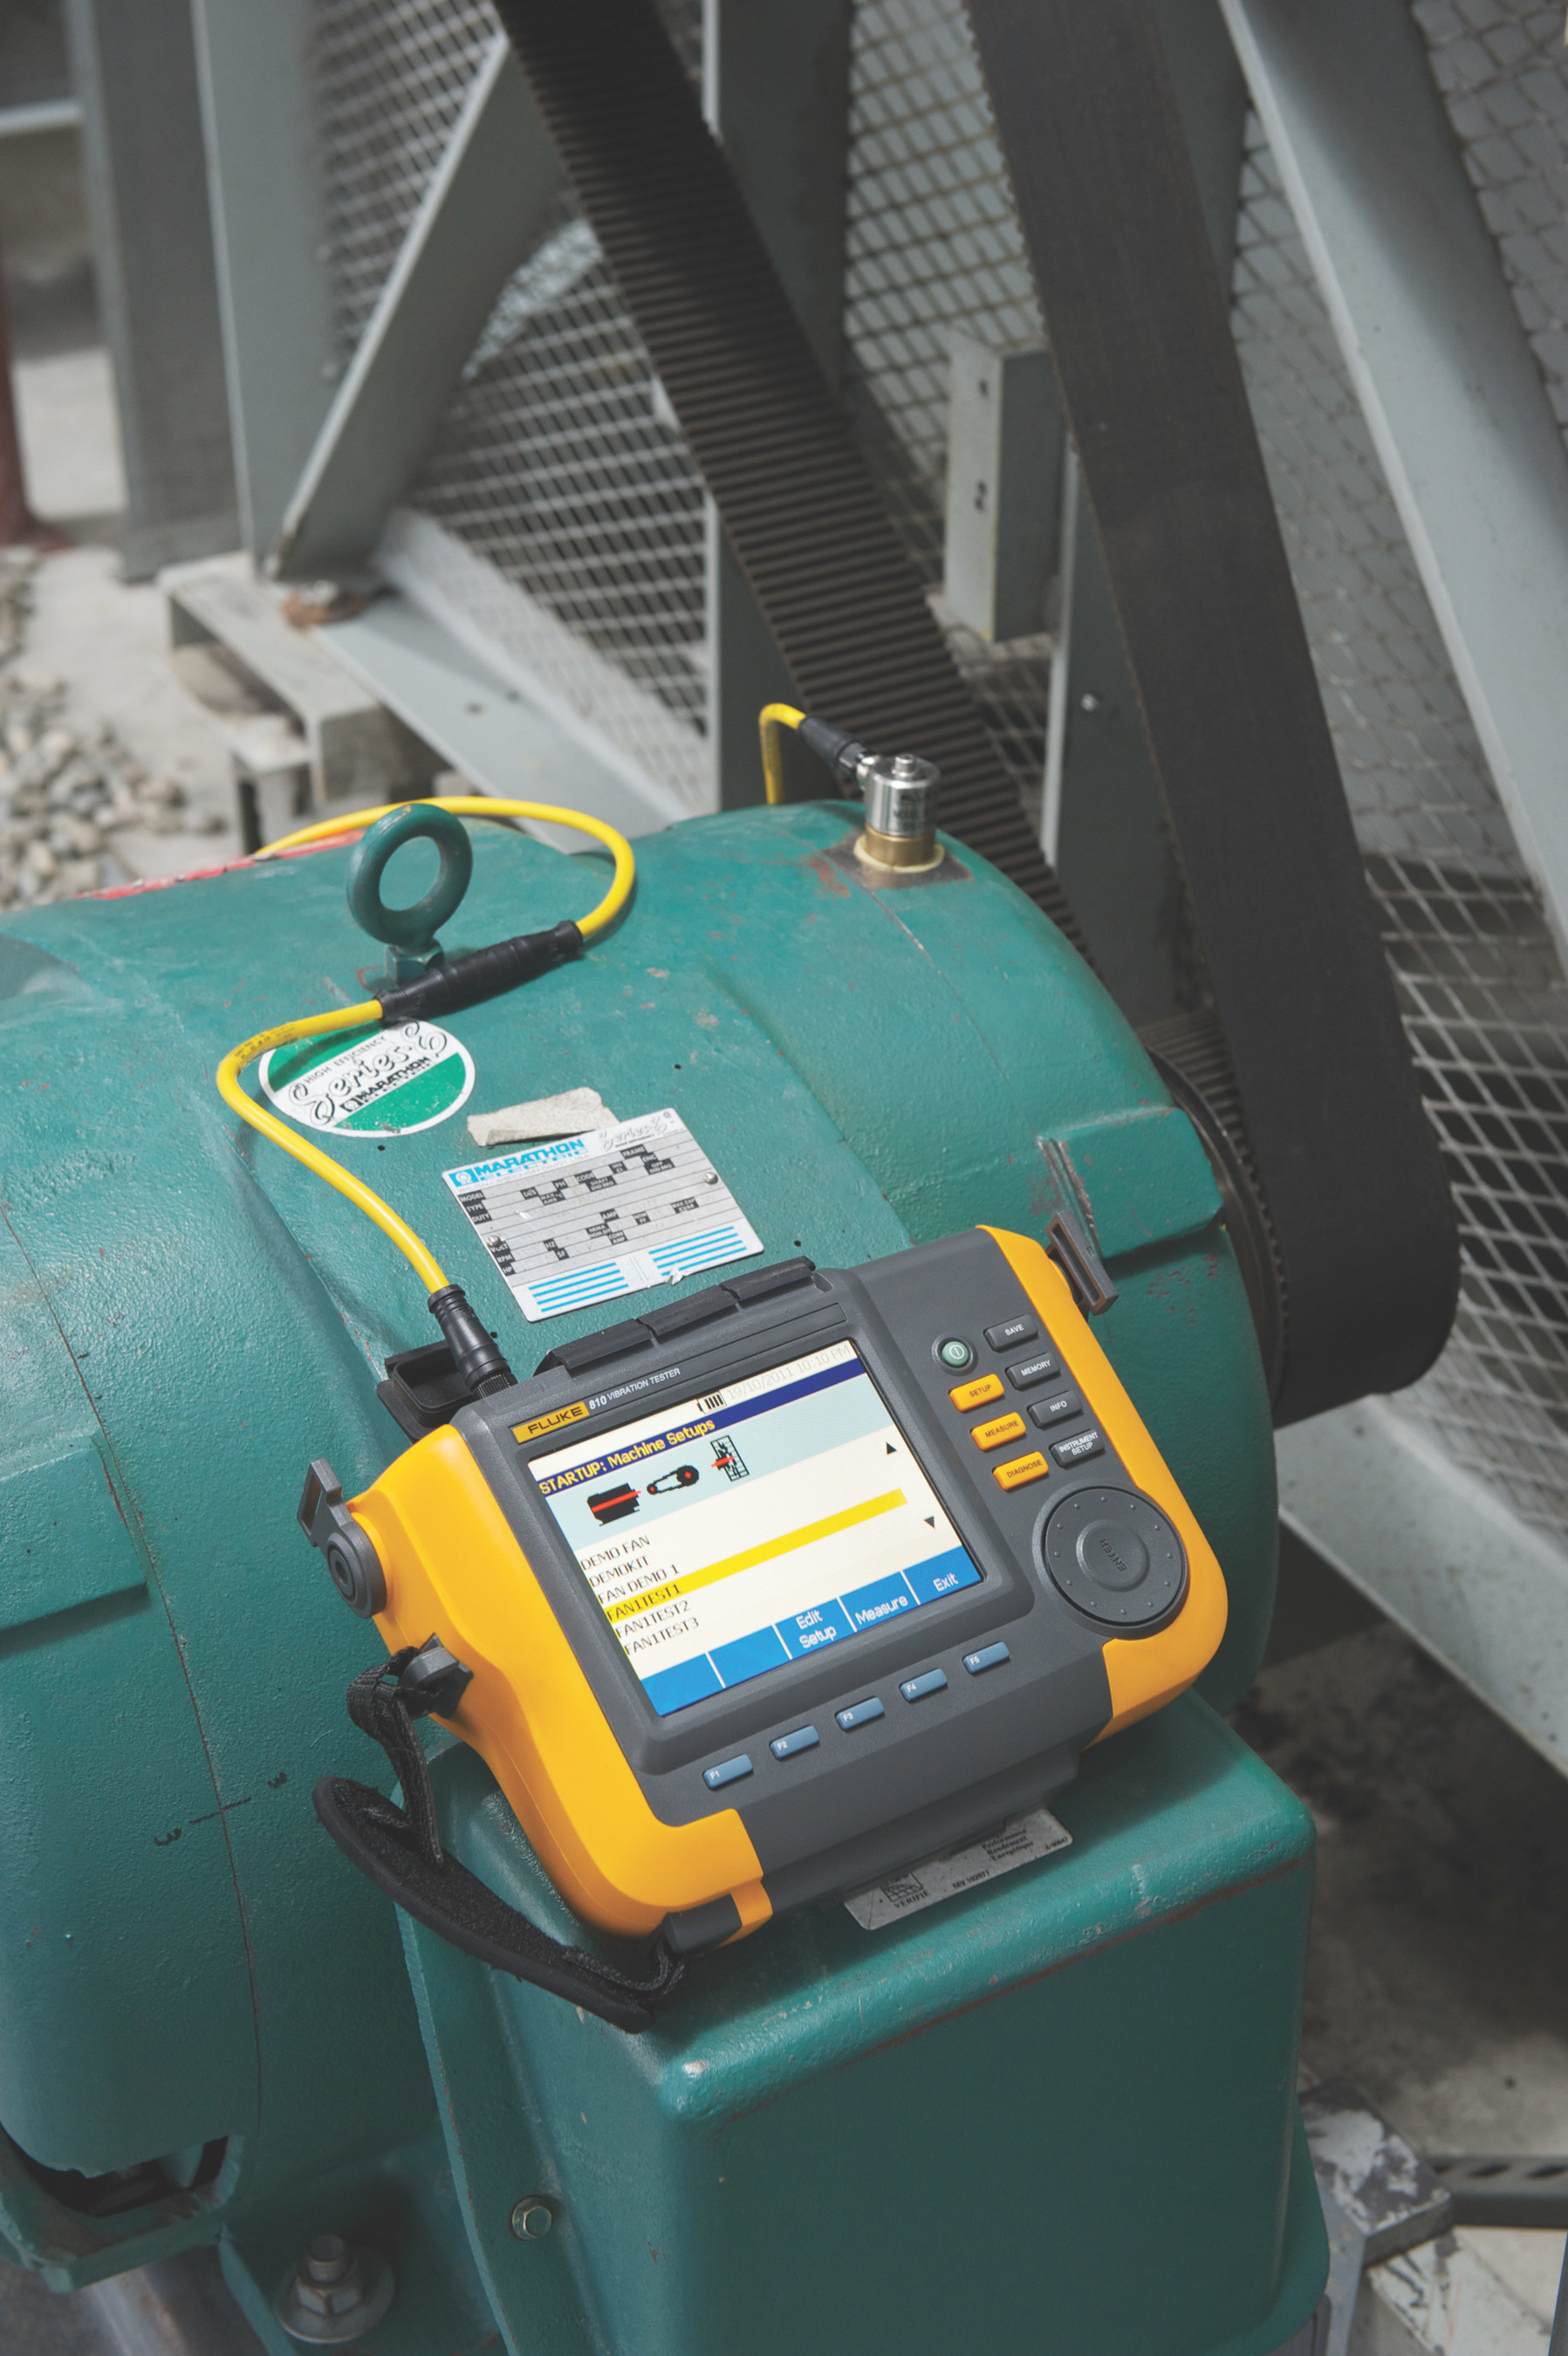 The 810 Vibration Tester combines a powerful diagnostic engine with a simple step-by-step process to report on specific machine faults and their severity the first time measurements are taken, without prior measurement history. It provides quantifiable proof of equipment condition that drives investment decisions to repair or replace machinery and allows maintenance technicians to anticipate equipment failures before they happen to minimize unplanned downtime and better control spare parts inventory.